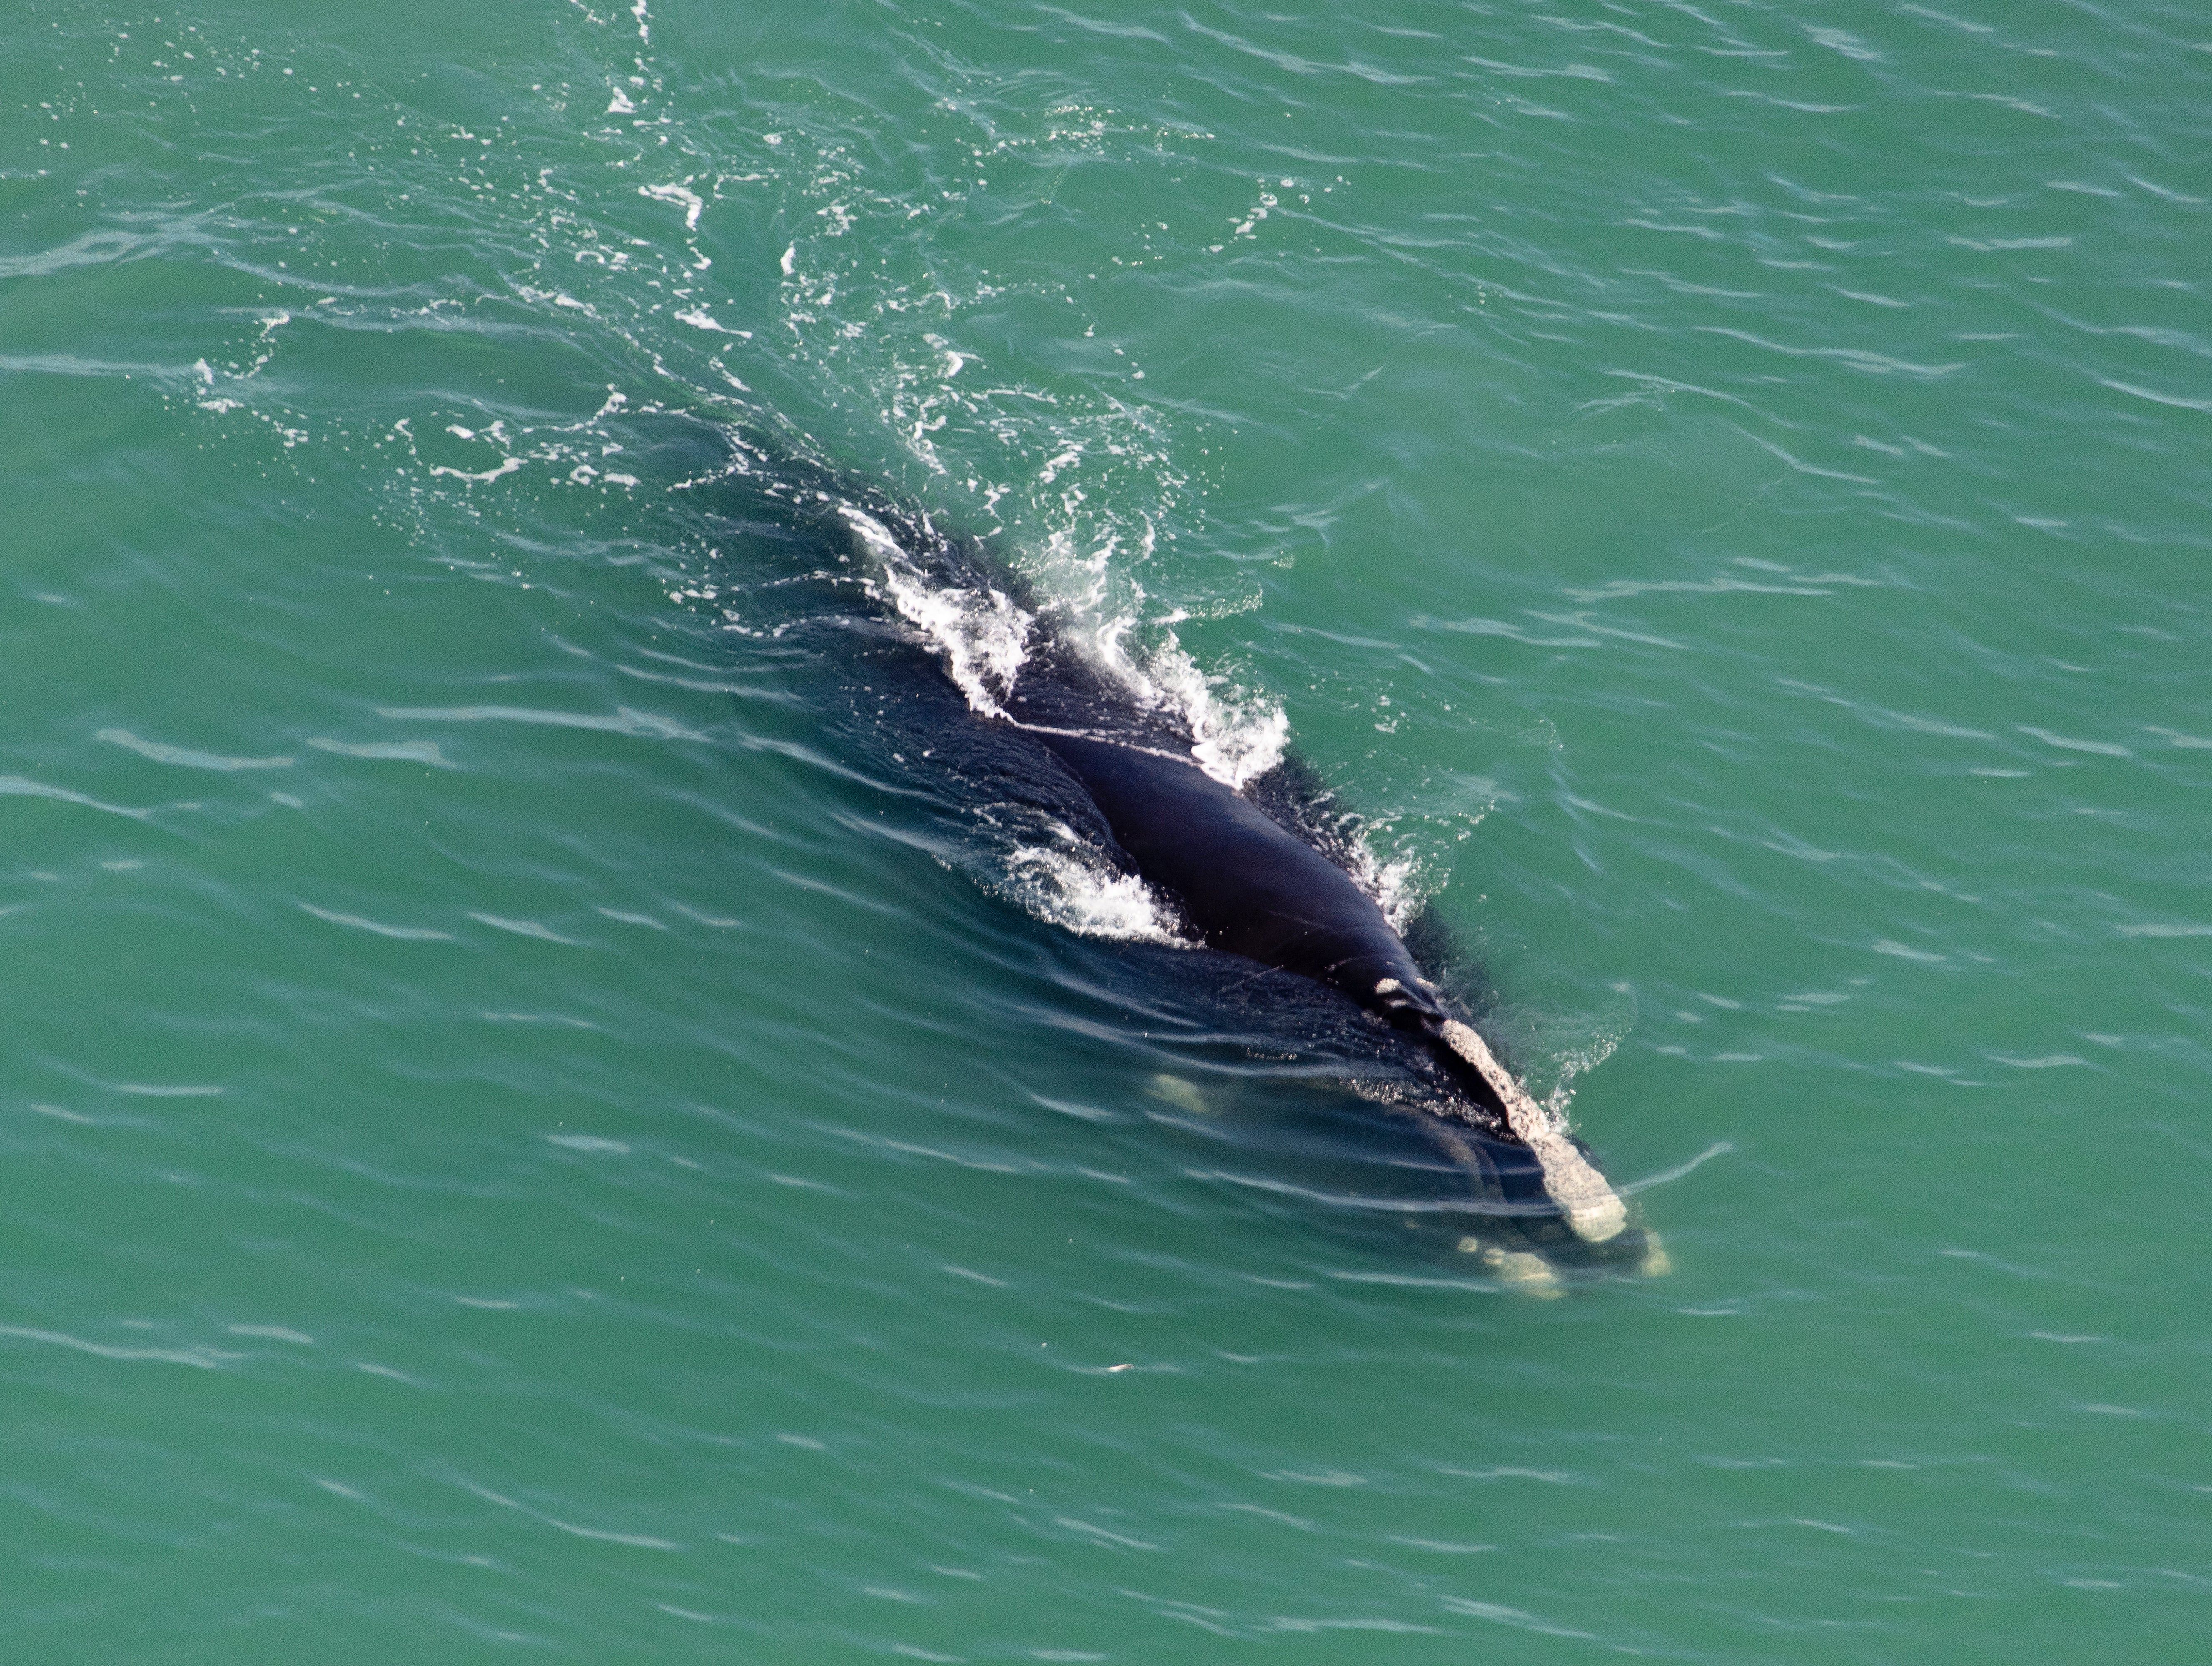 A North Atlantic right whale, of which there are fewer than 400 remaining. Climate change and human interference has been cited as reasons for the specie’s decline.